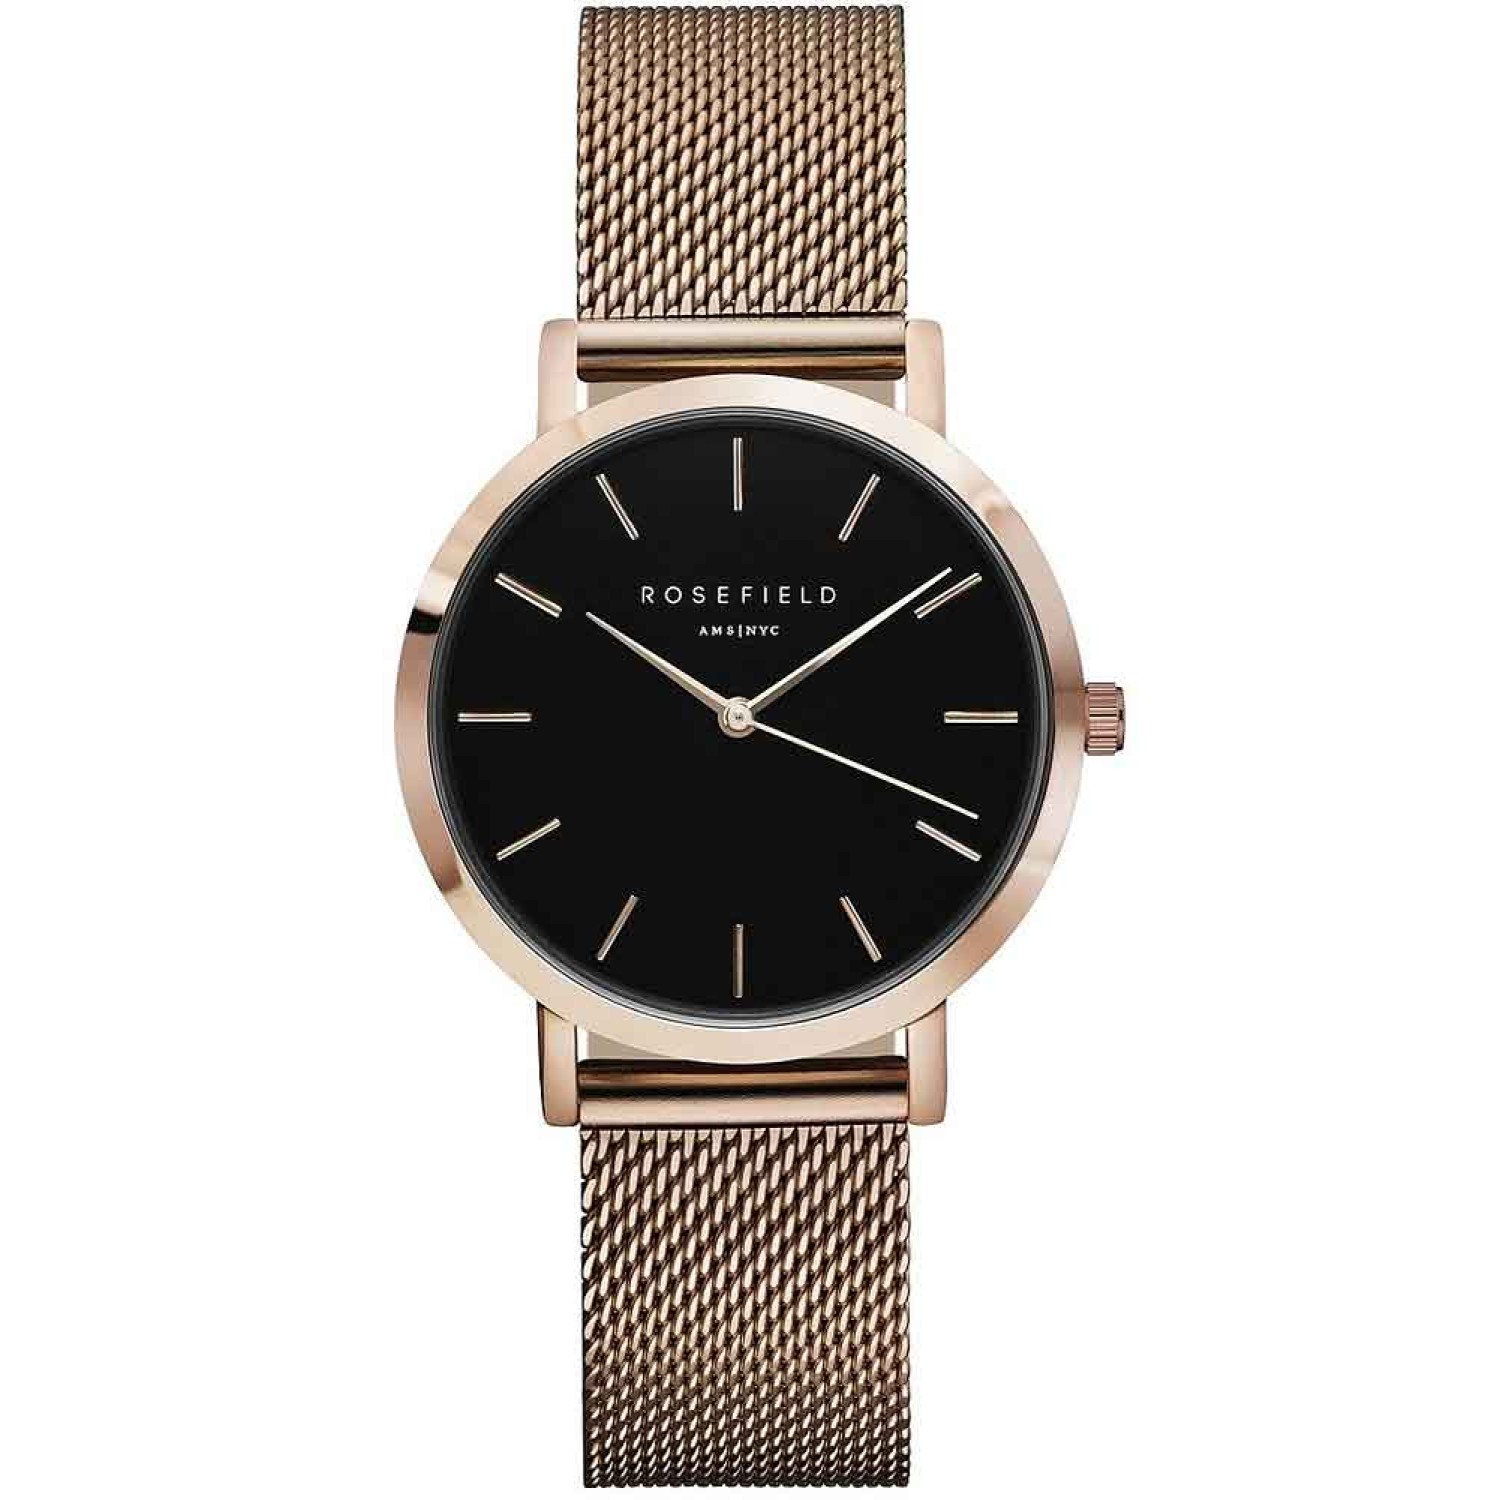 TBR-T59 Rosefield Rose Gold Tribeca Mesh Watch. TRIBECA combines favorites from Rosefields existing three collections into a series of smaller sized watches for the more delicate wrist. With a 33mm watch case & a minimal design, TRIBECA is the ultimat